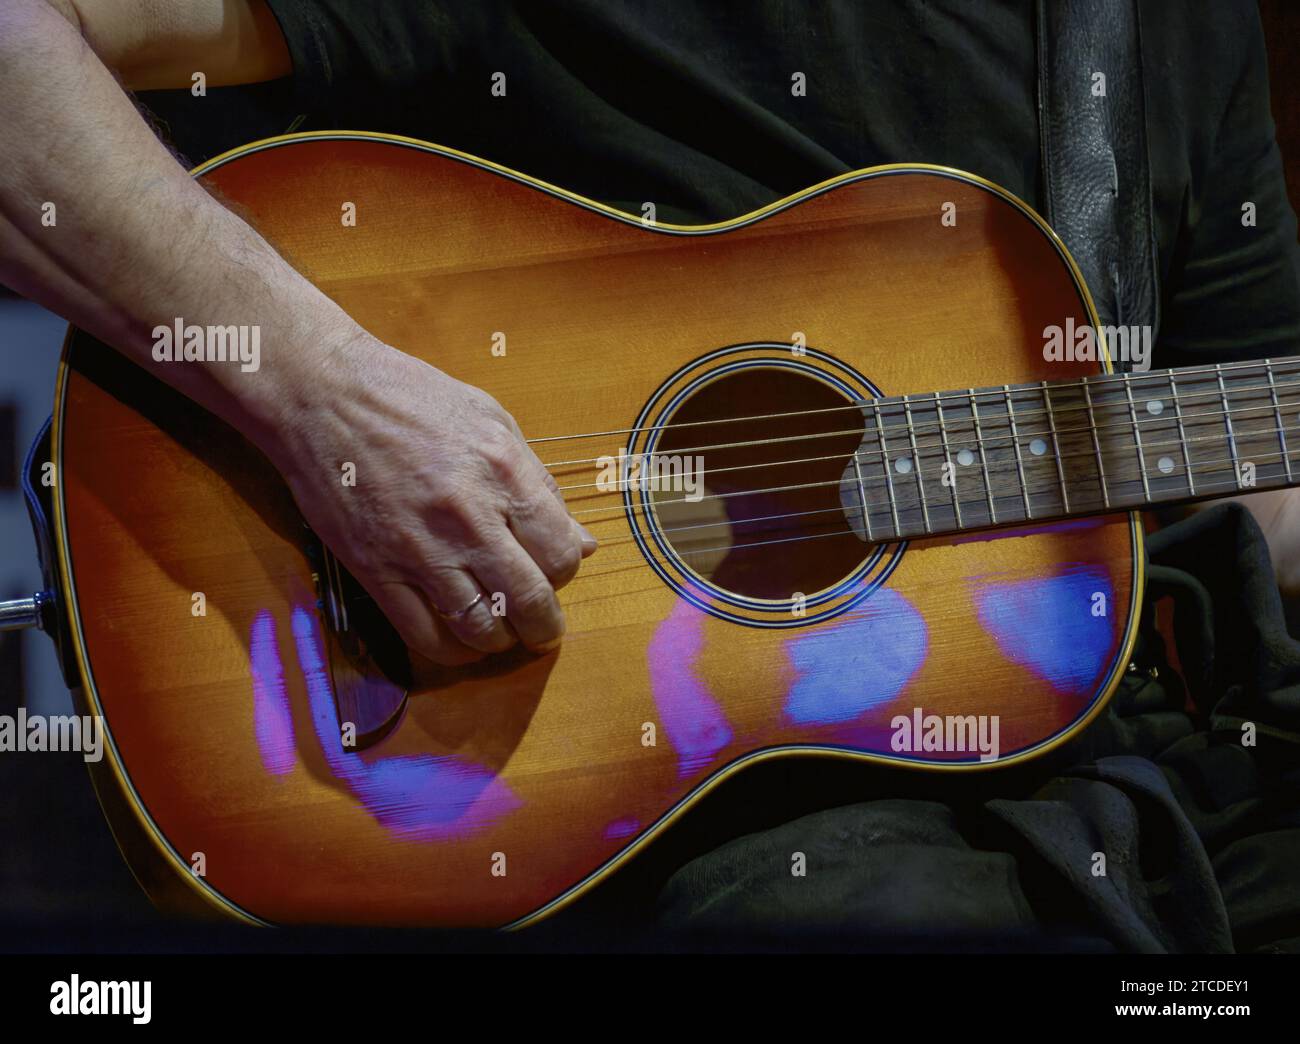 Image of a guitarist's hand playing on the strings of a guitar Stock Photo